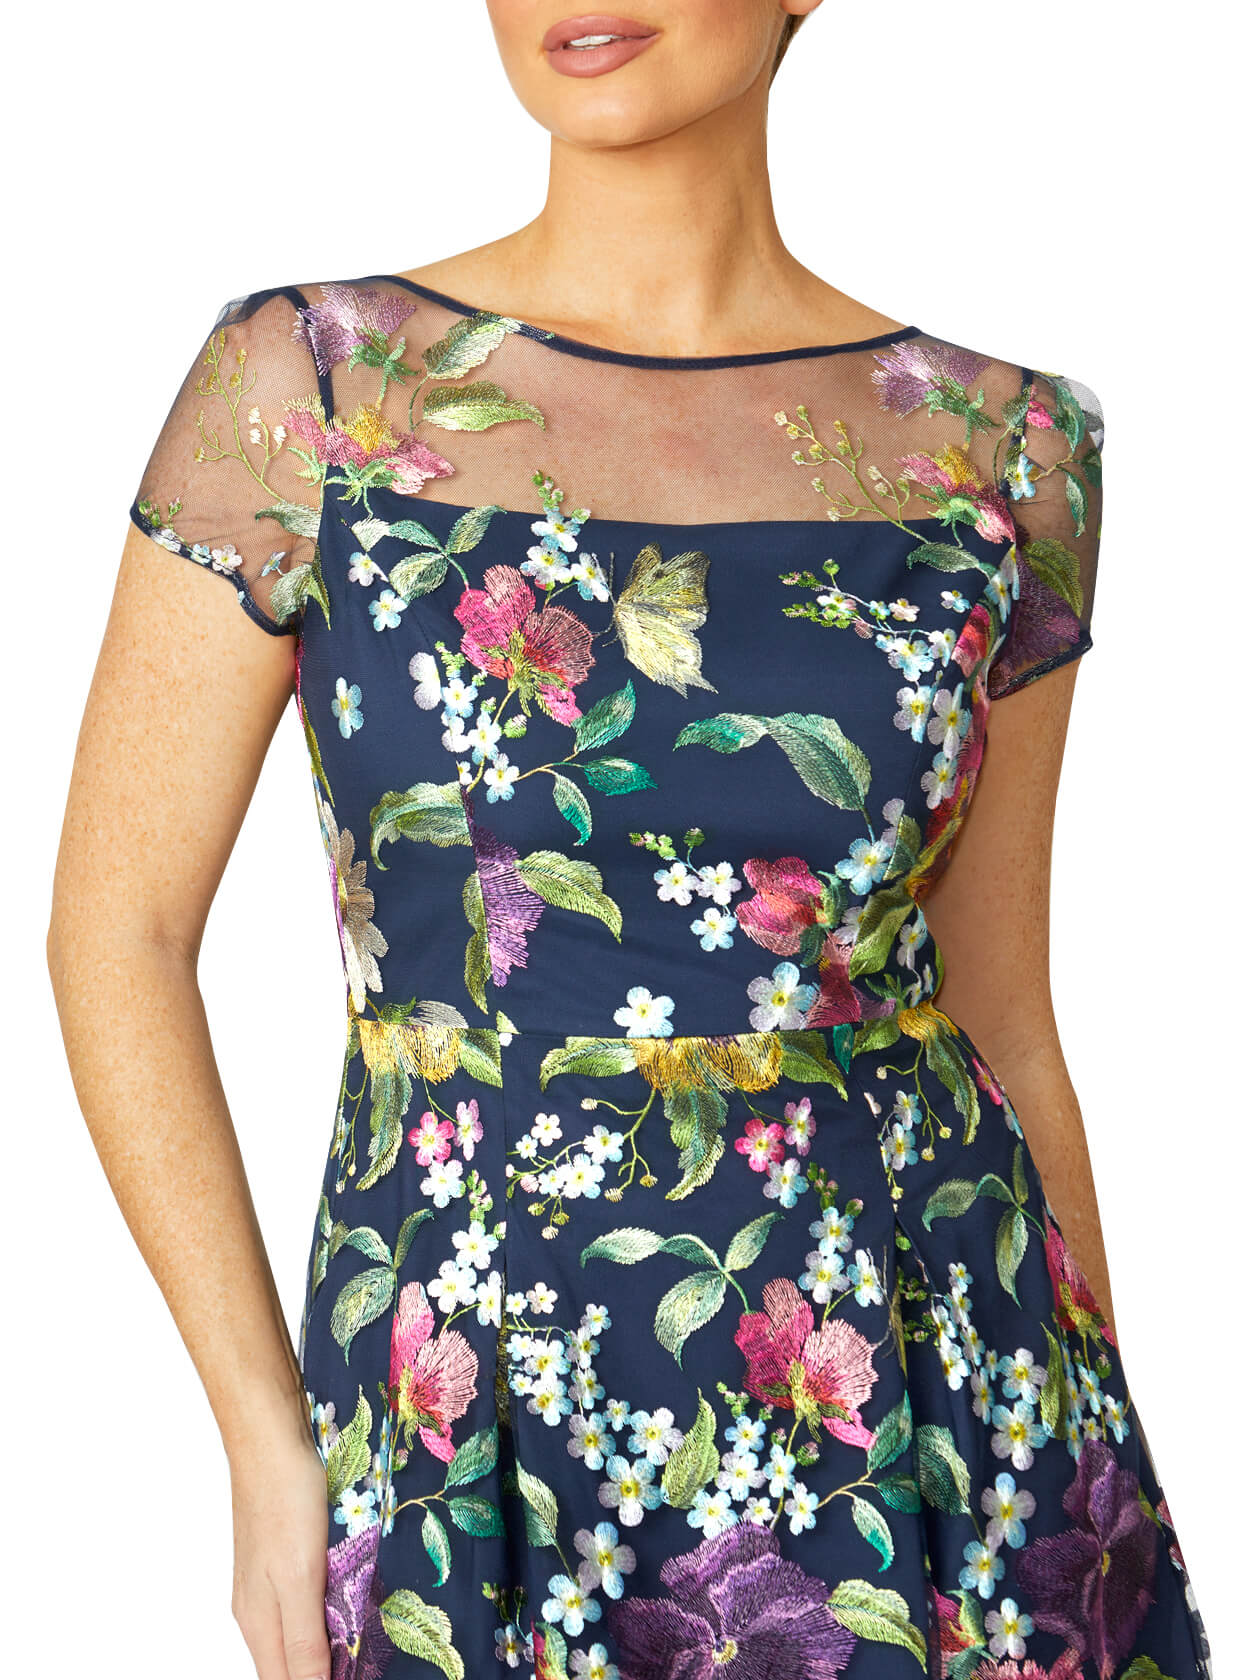 FLORAL MESH FIT AND FLARE DRESS - XXL - Multi